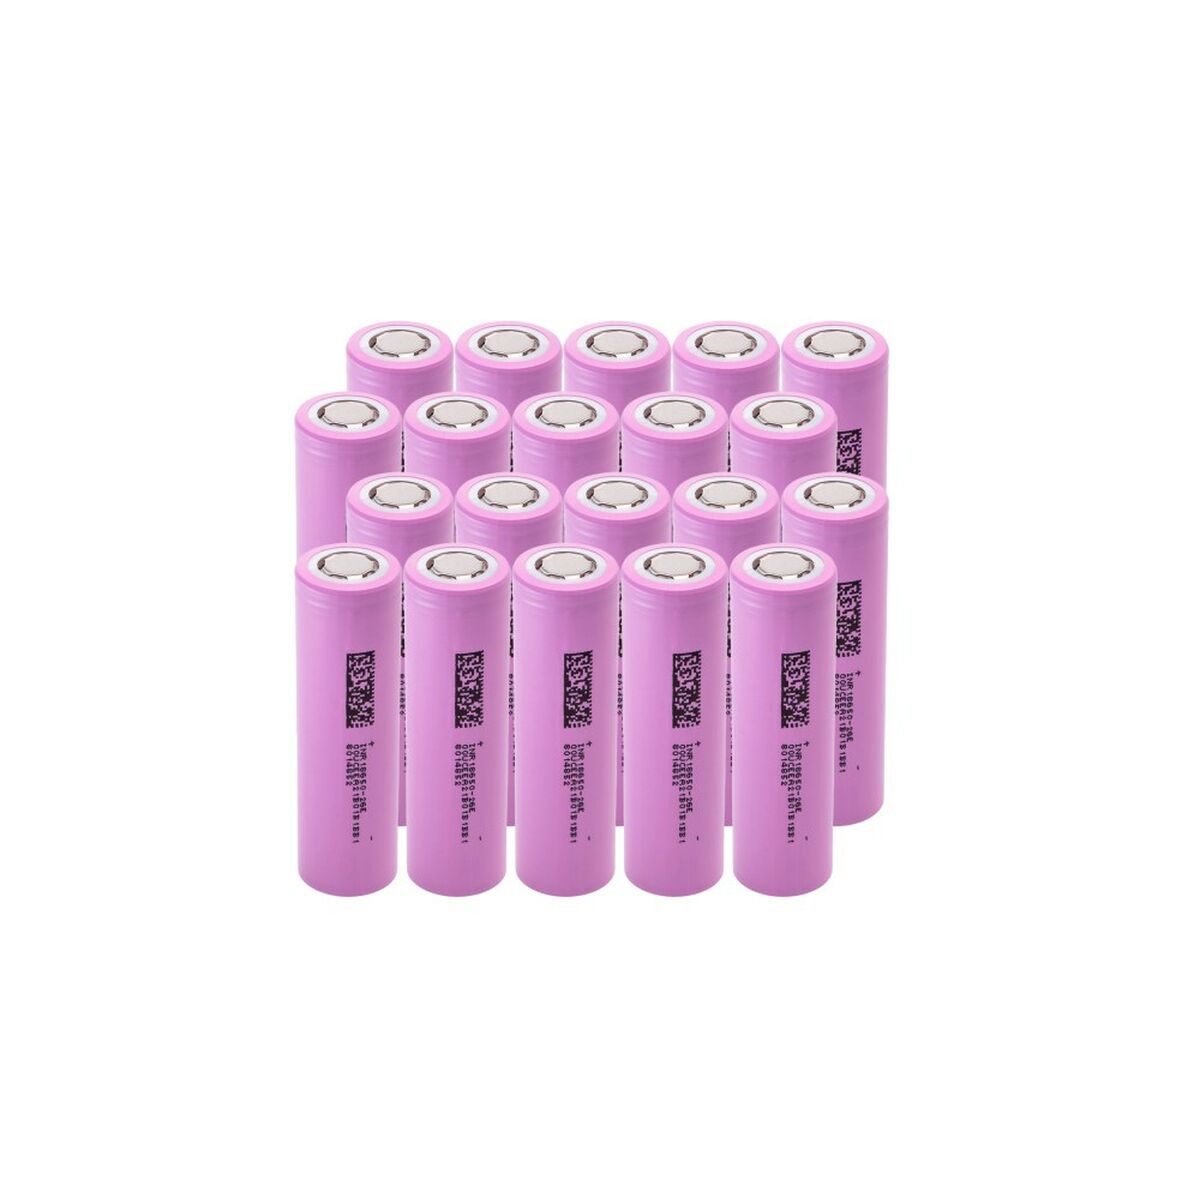 Rechargeable Batteries Green Cell 20GC18650NMC26 2600 mAh 3,6 V 18650 (20 Units)